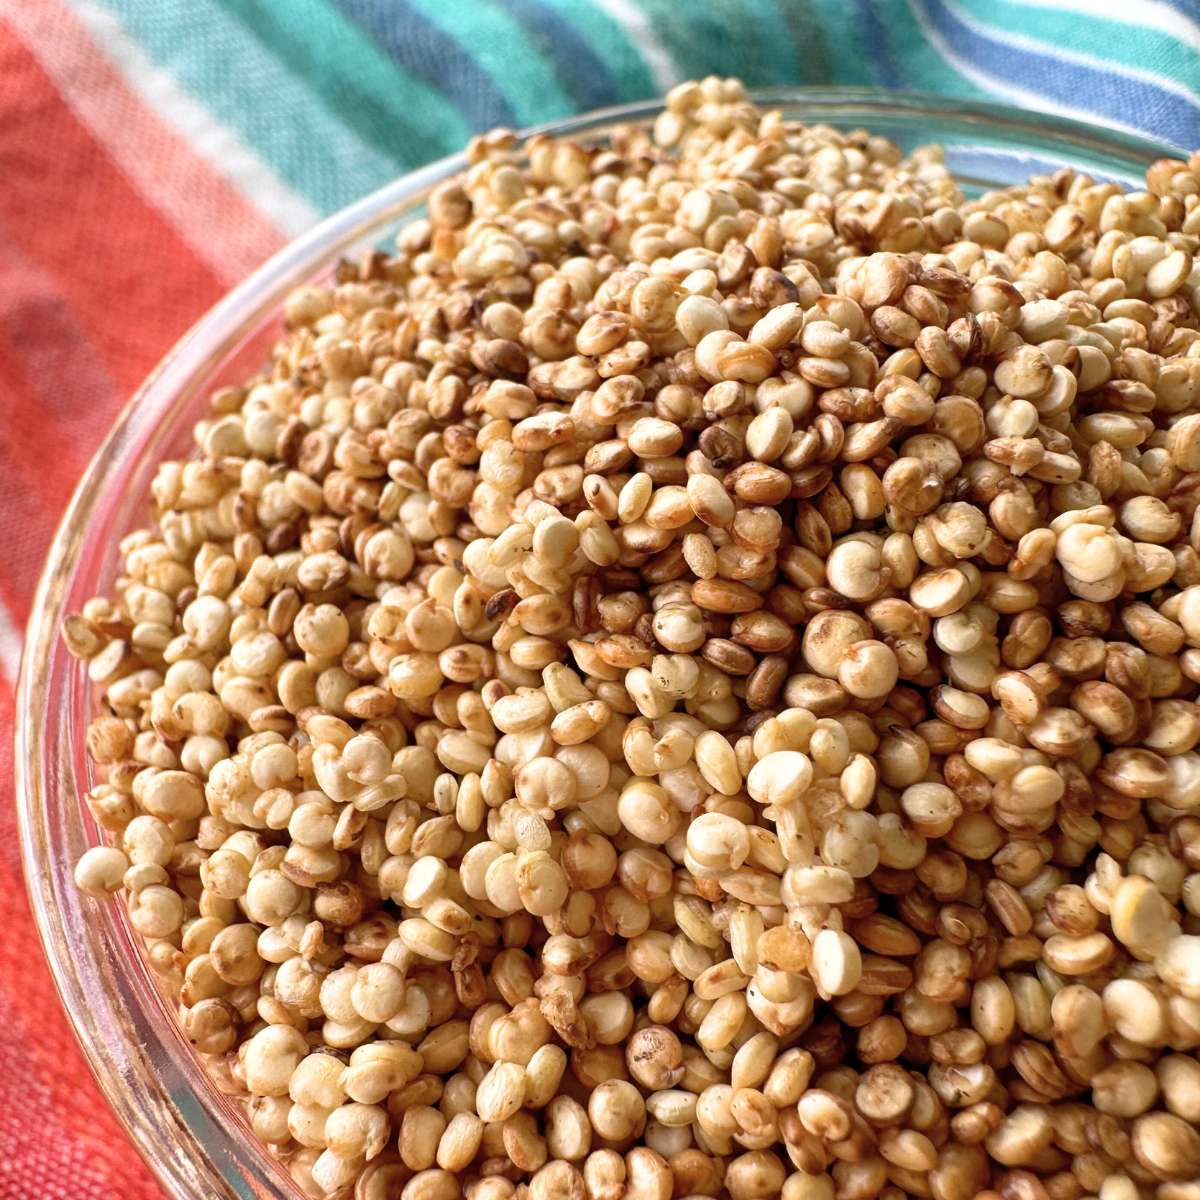 Close up of popped quinoa in a glass bowl. Toasted quinoa looks golden brown and slightly puffed out. The bowl of quinoa is on top of a orange, red, and blue cloth napkin.